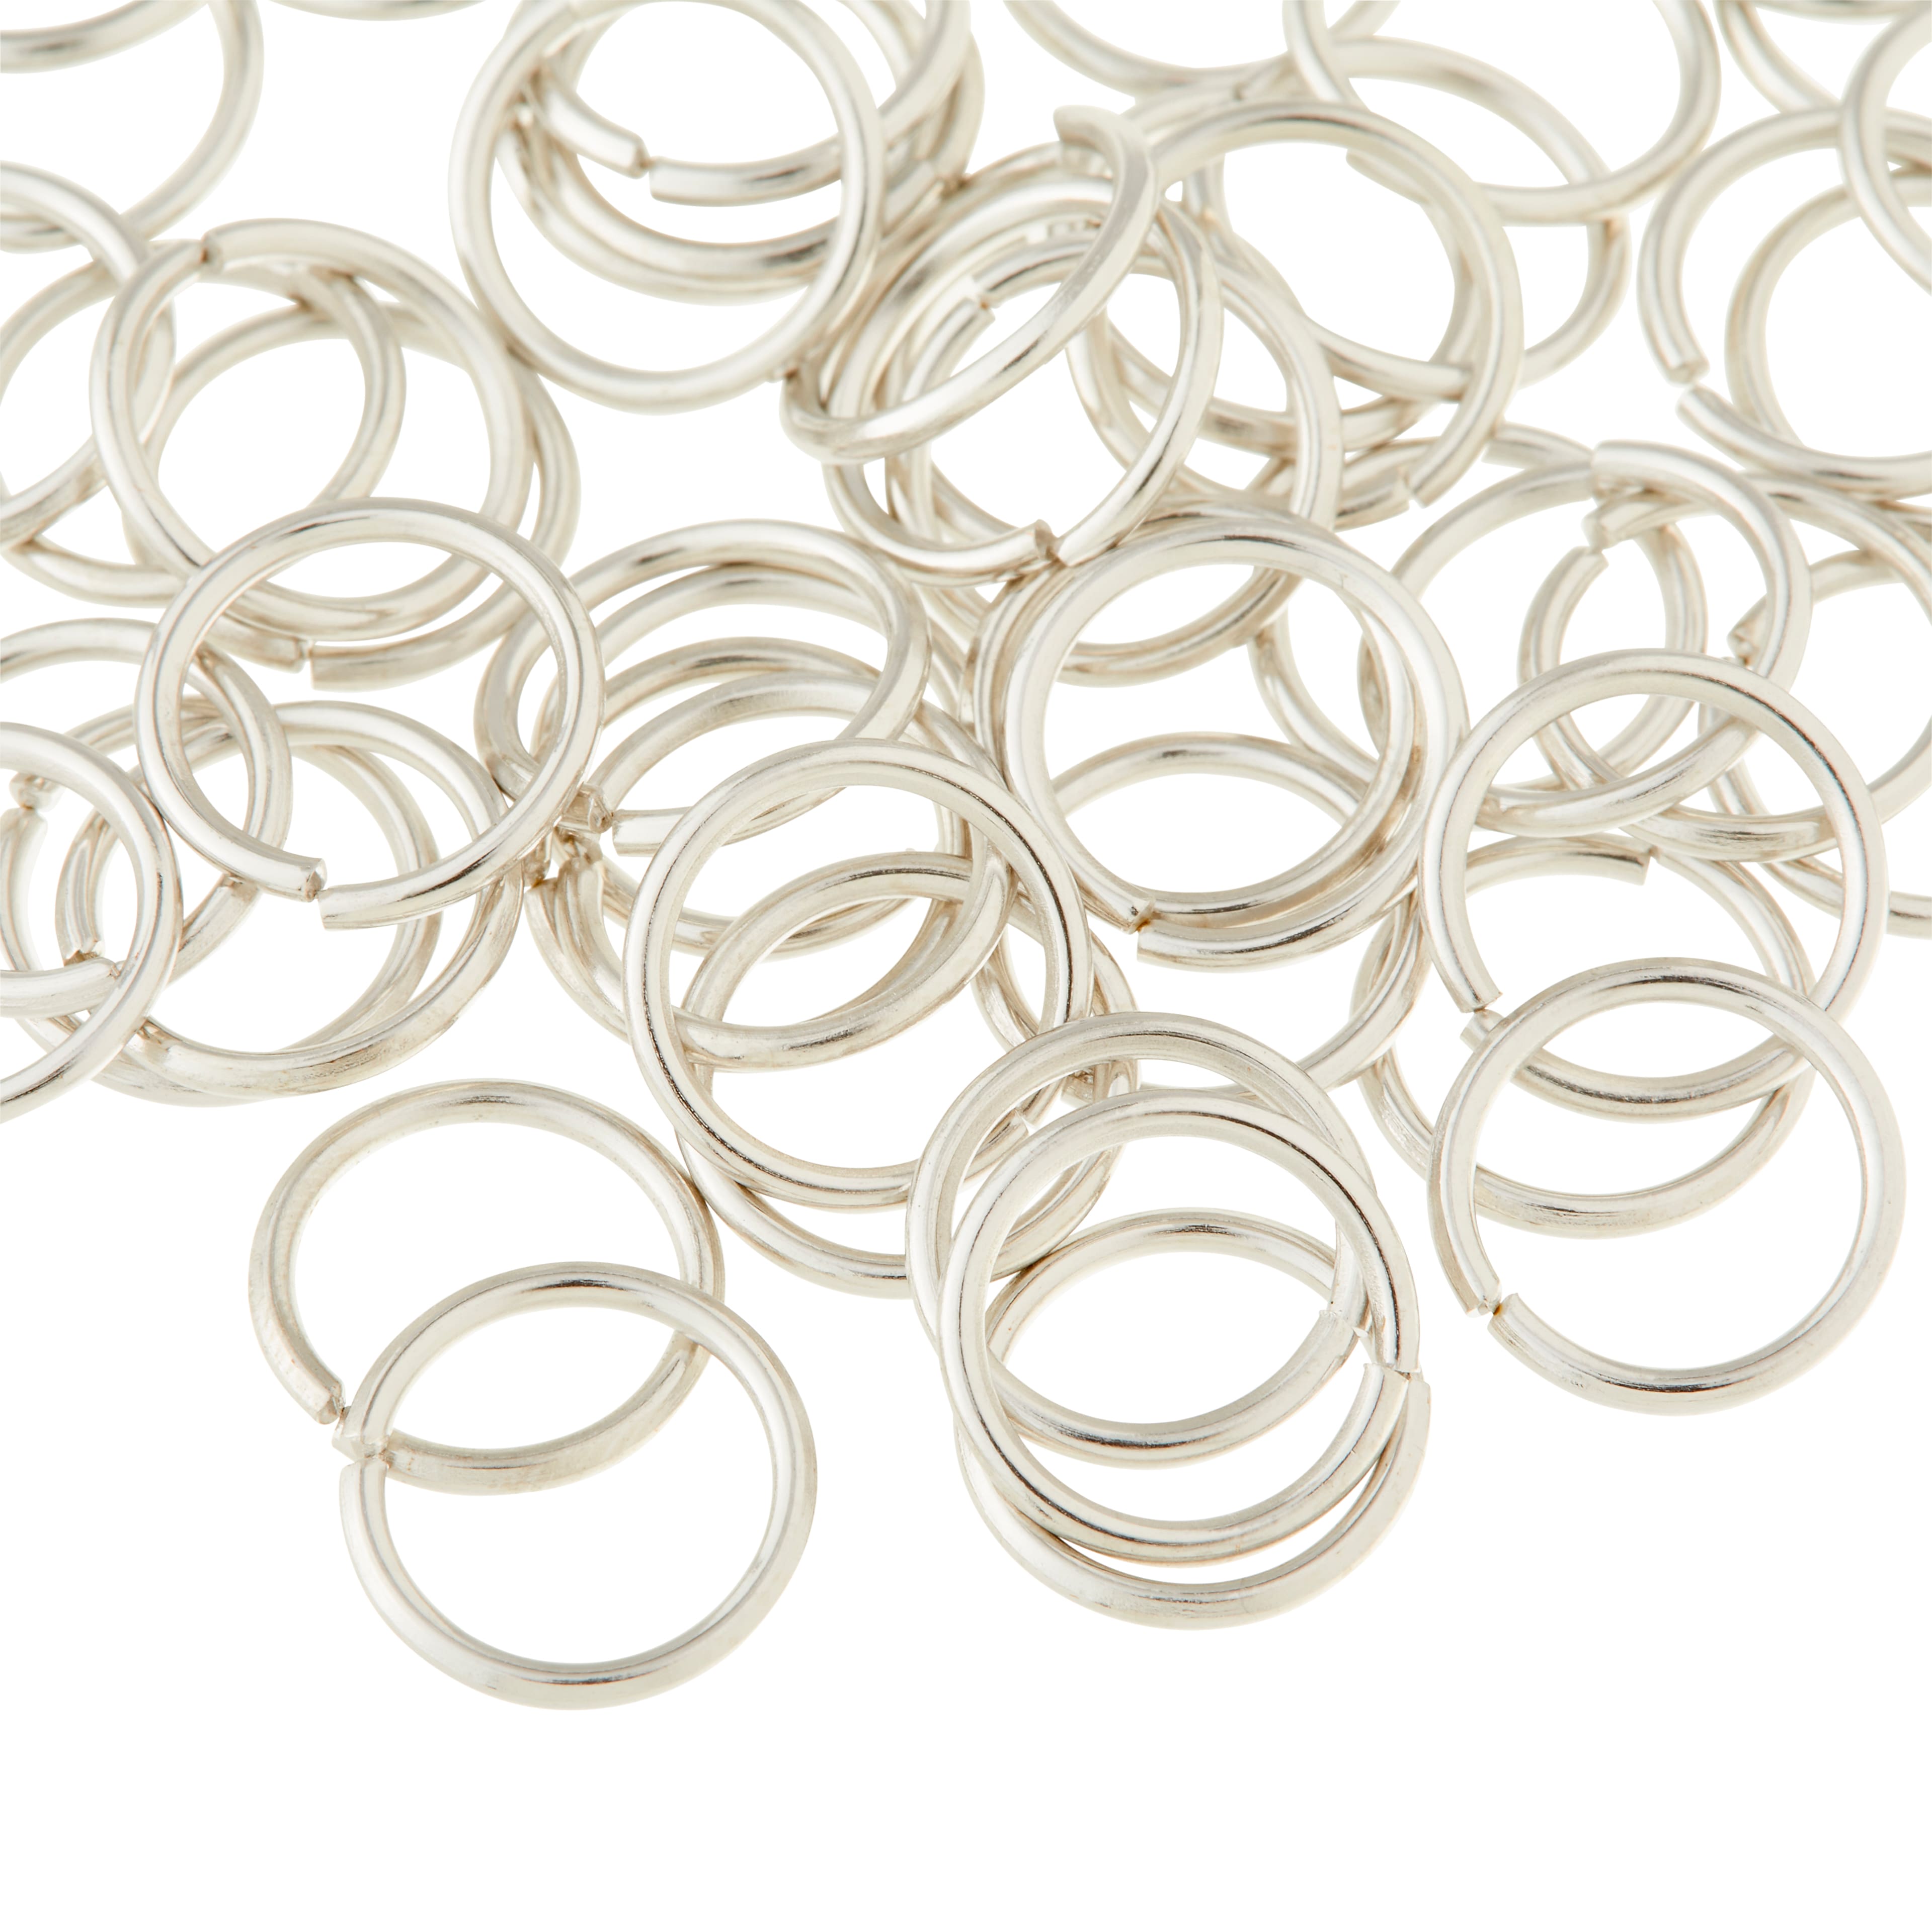 How to Choose the Right Jump Rings - Beads and Pieces